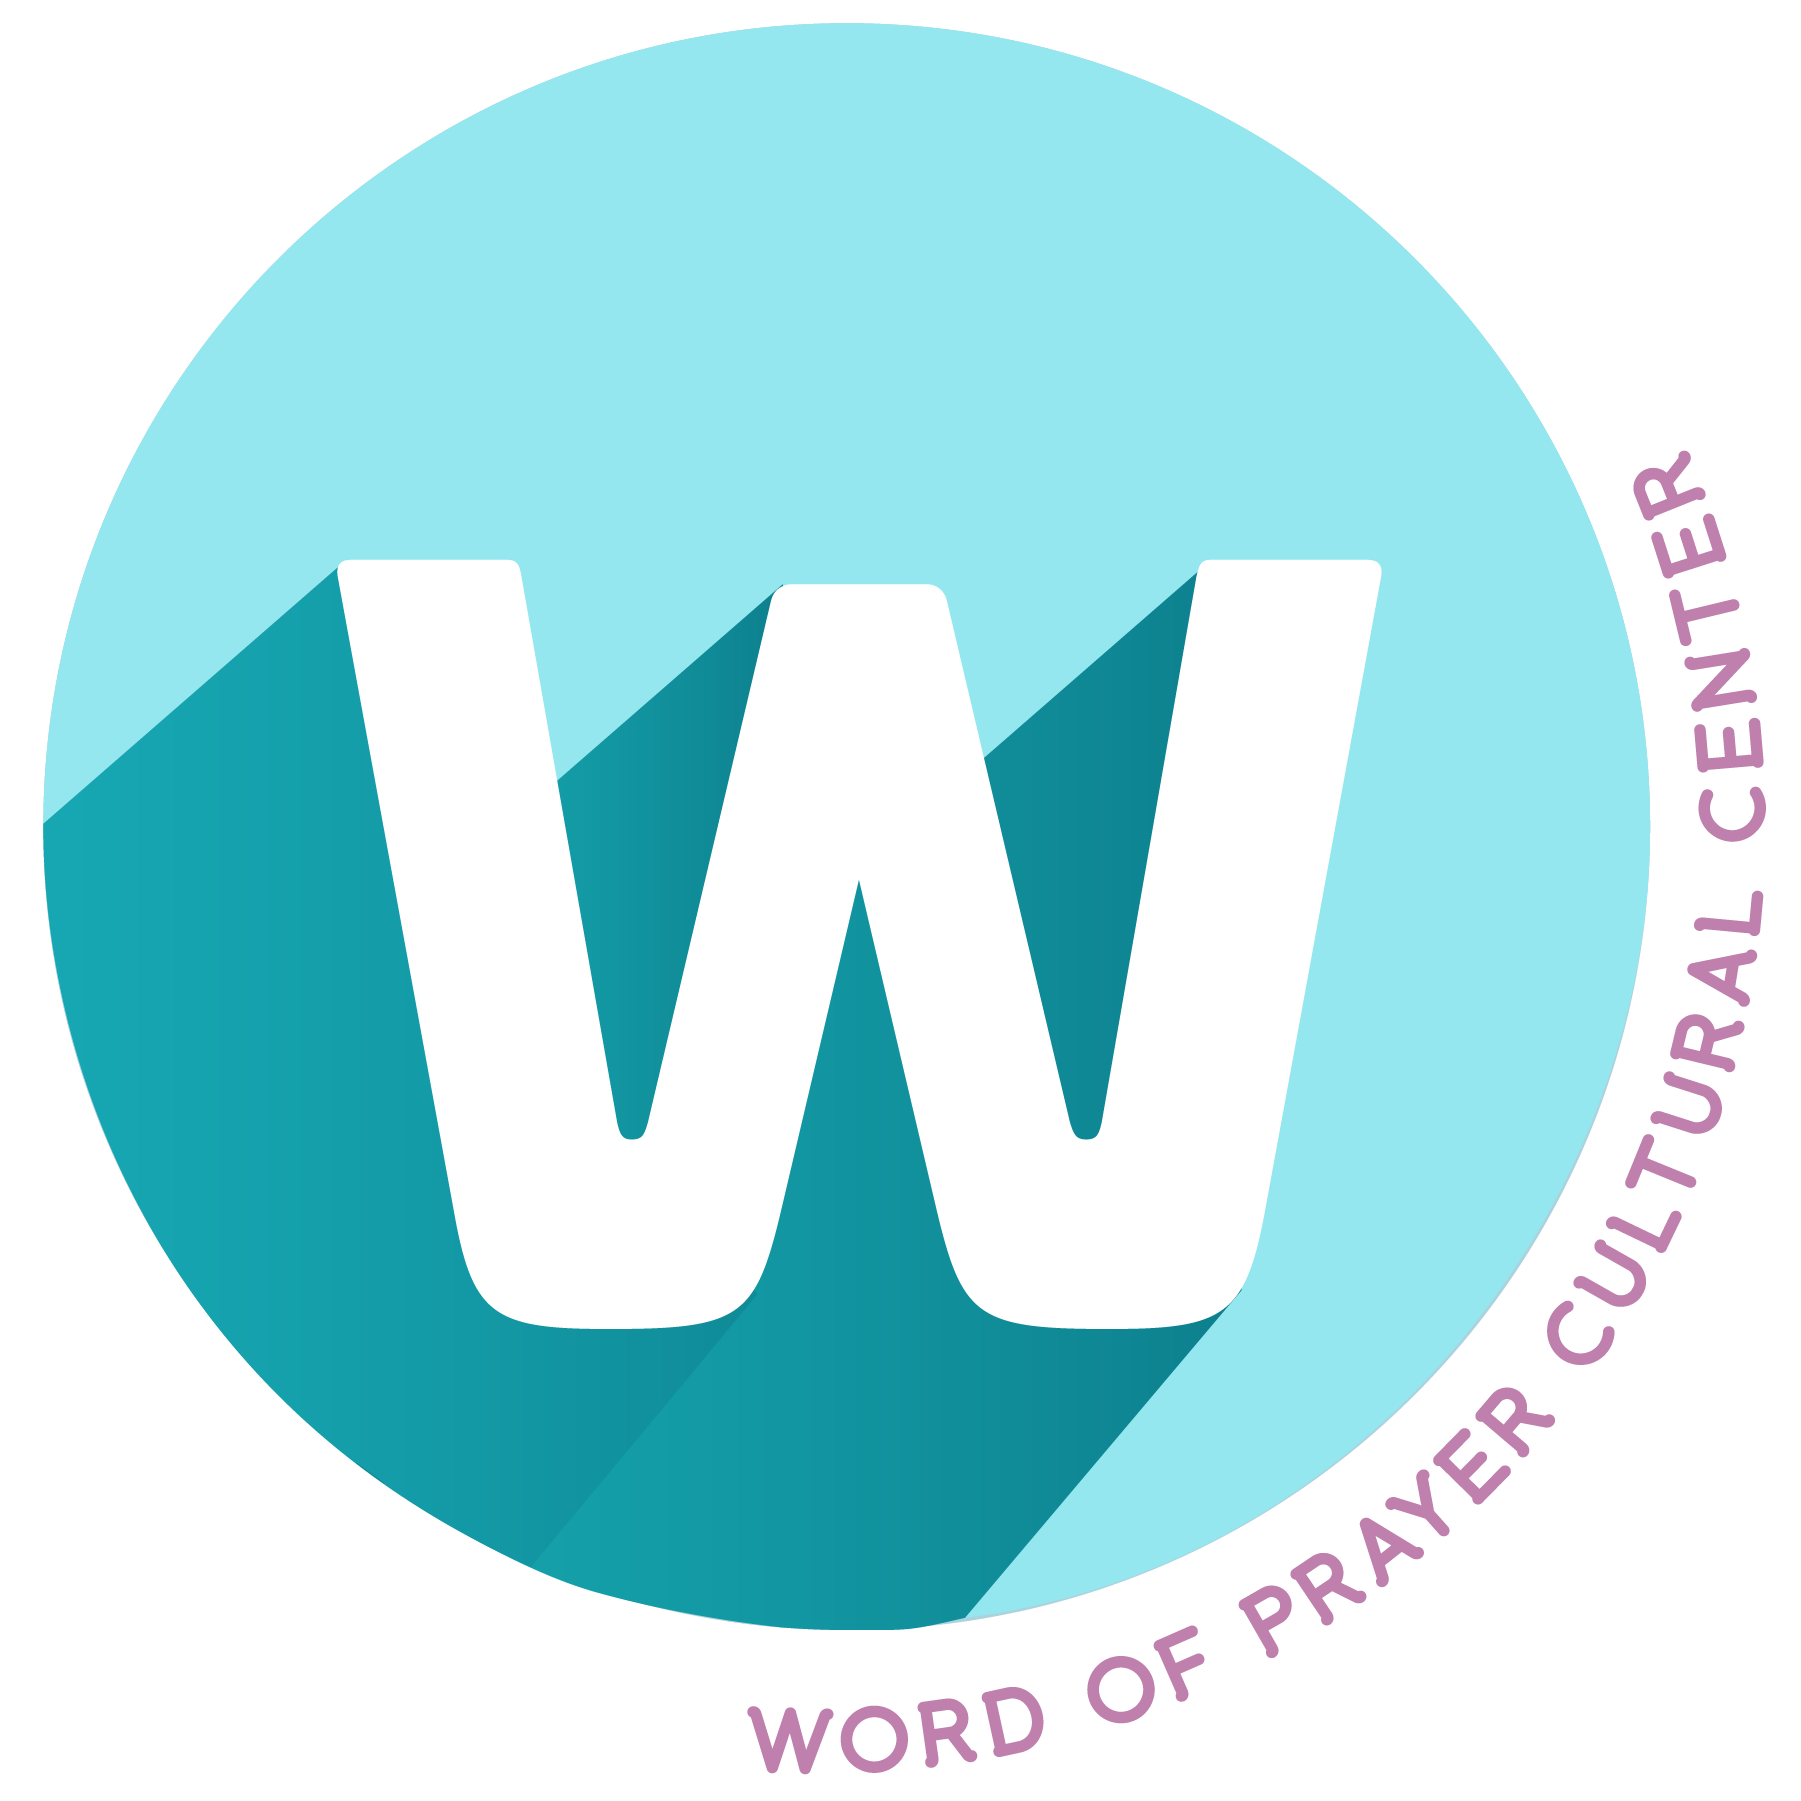 WOPCC | Word of Pray Cultural Center